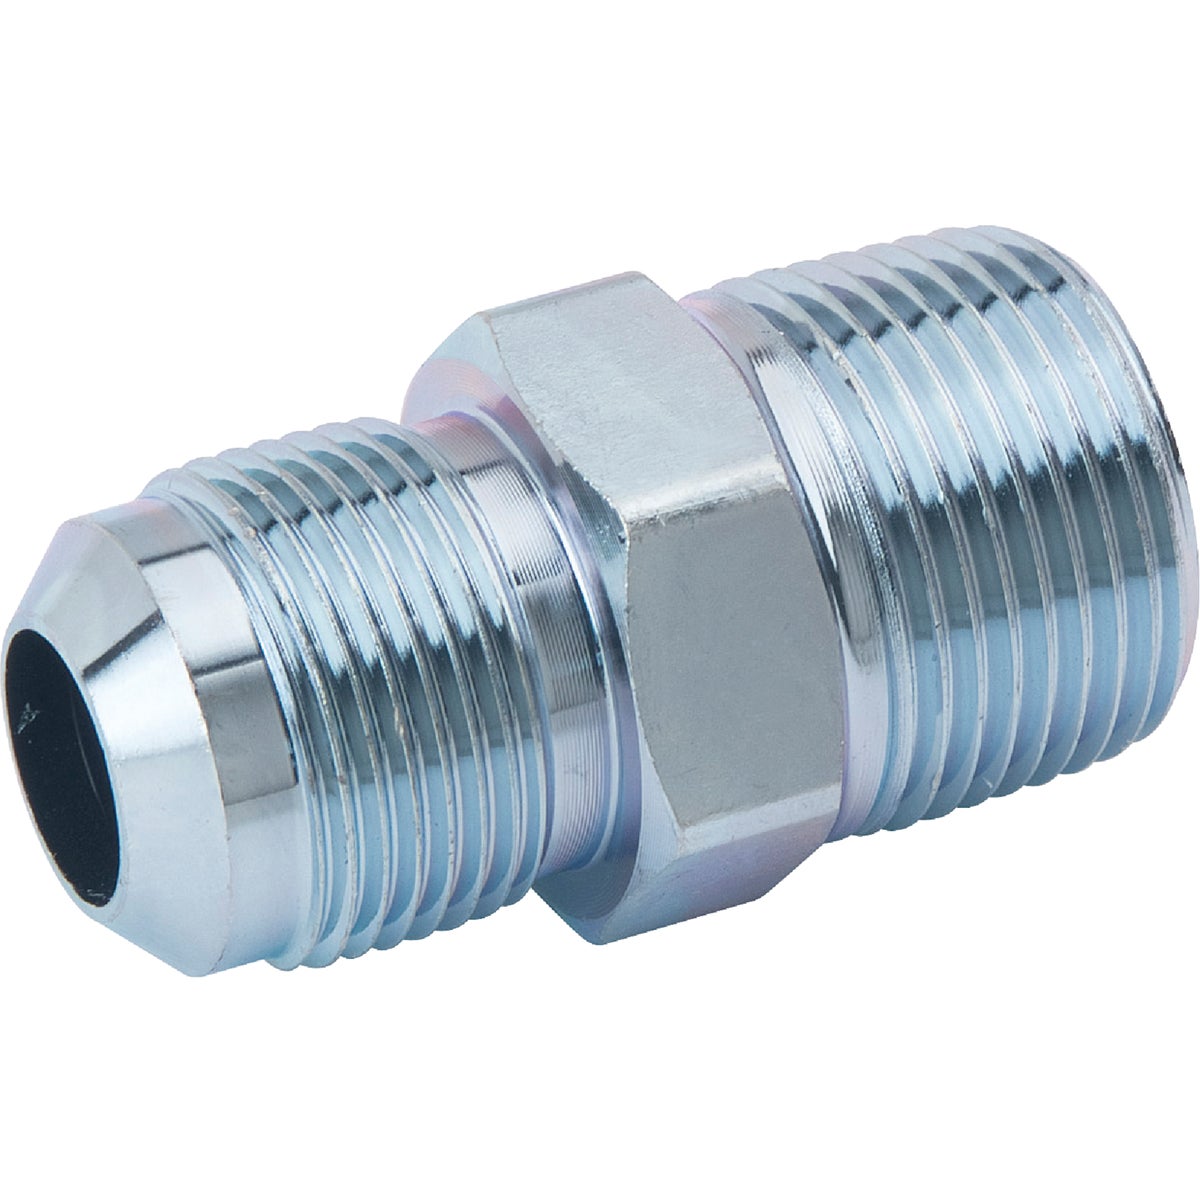 Dormont 5/8 In. OD Male Flare x 3/4 In. MIP (Tapped 1/2 In. FIP) Zinc-Plated Carbon Steel Adapter Gas Fitting, Bulk